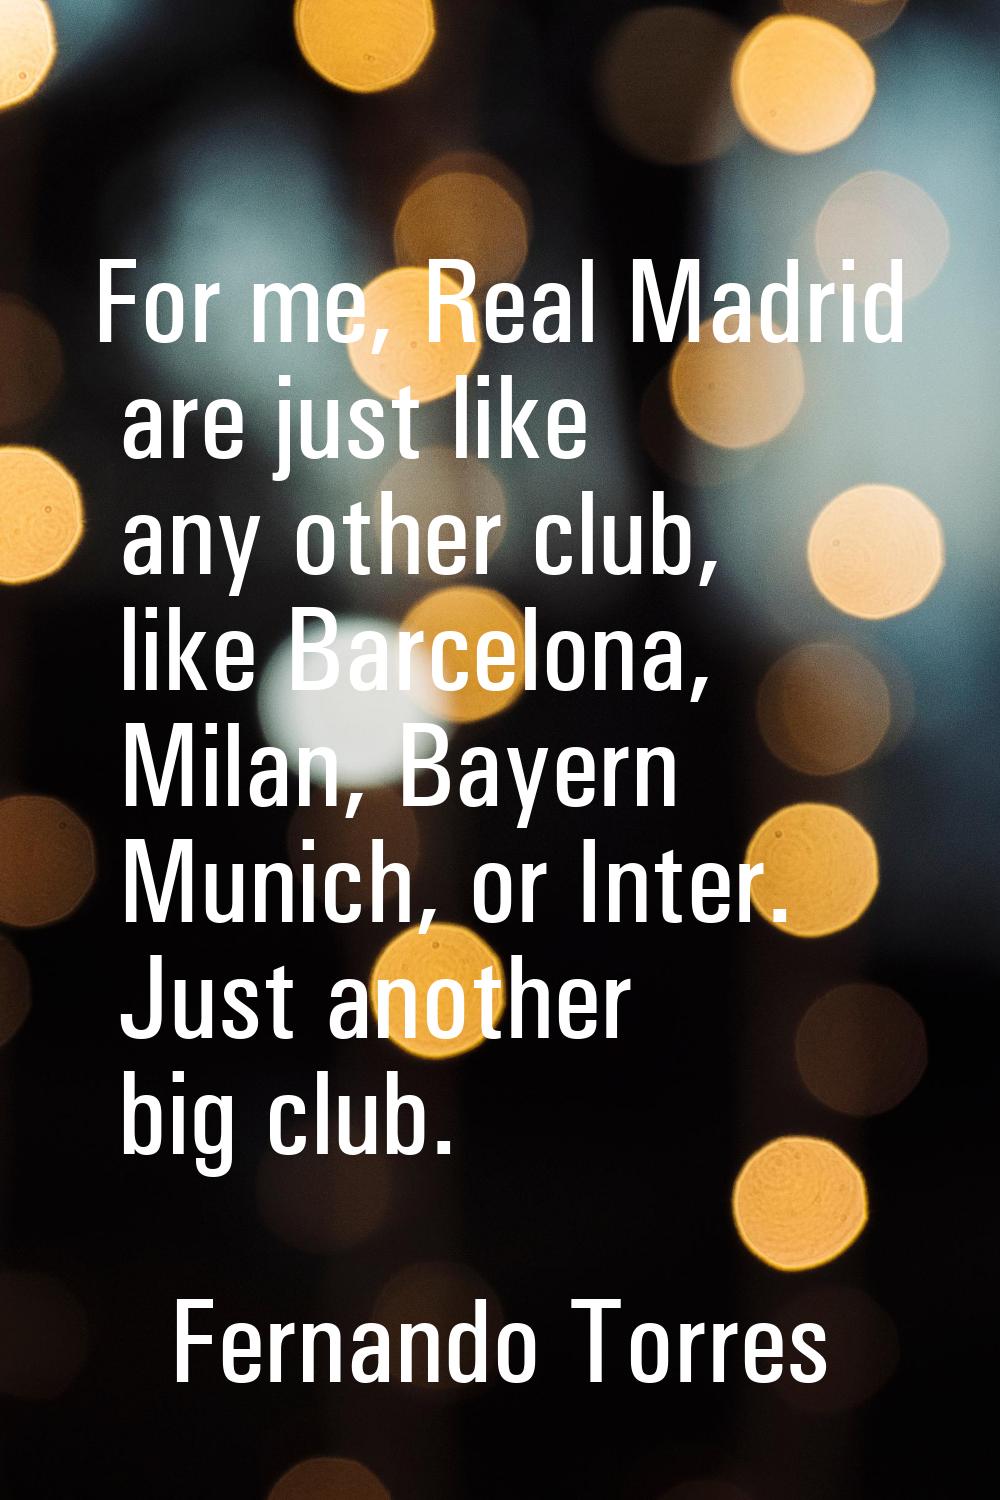 For me, Real Madrid are just like any other club, like Barcelona, Milan, Bayern Munich, or Inter. J